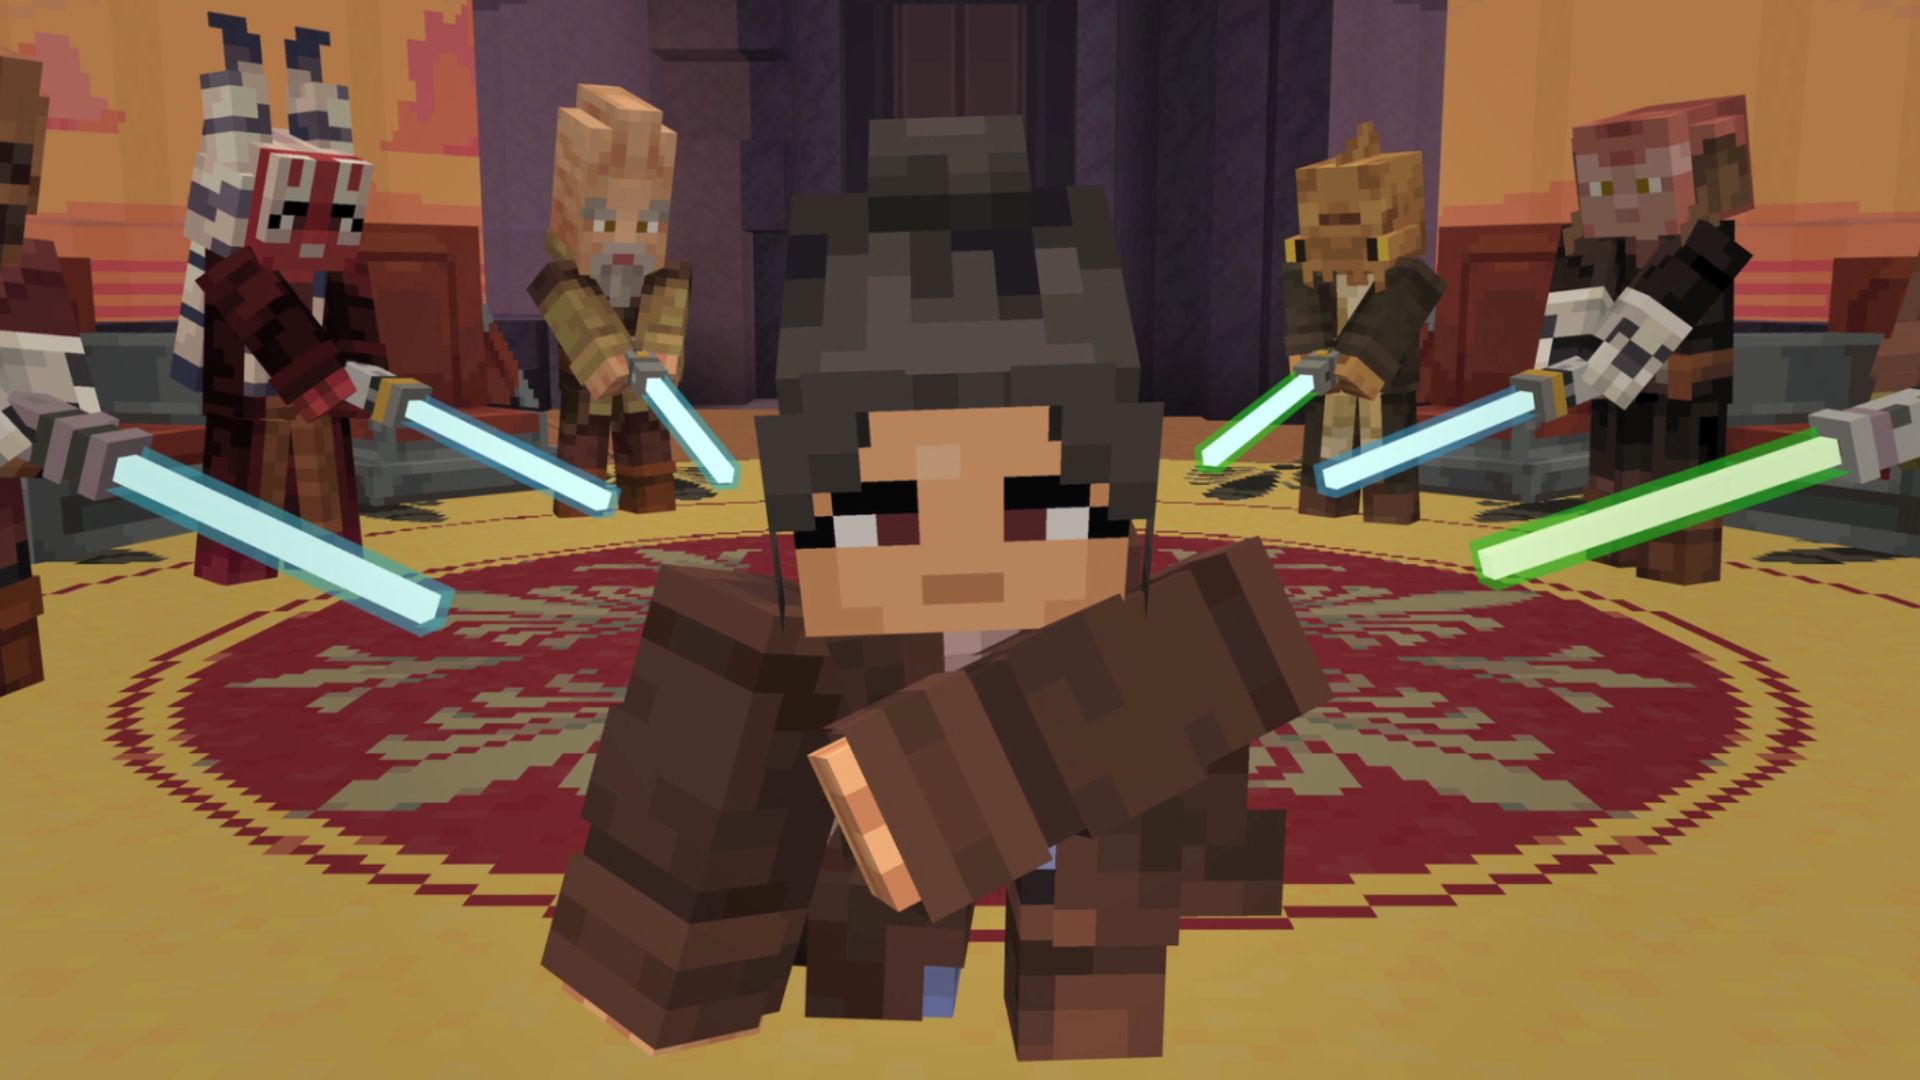 New Minecraft Star Wars DLC has lightsaber combat and Force powers